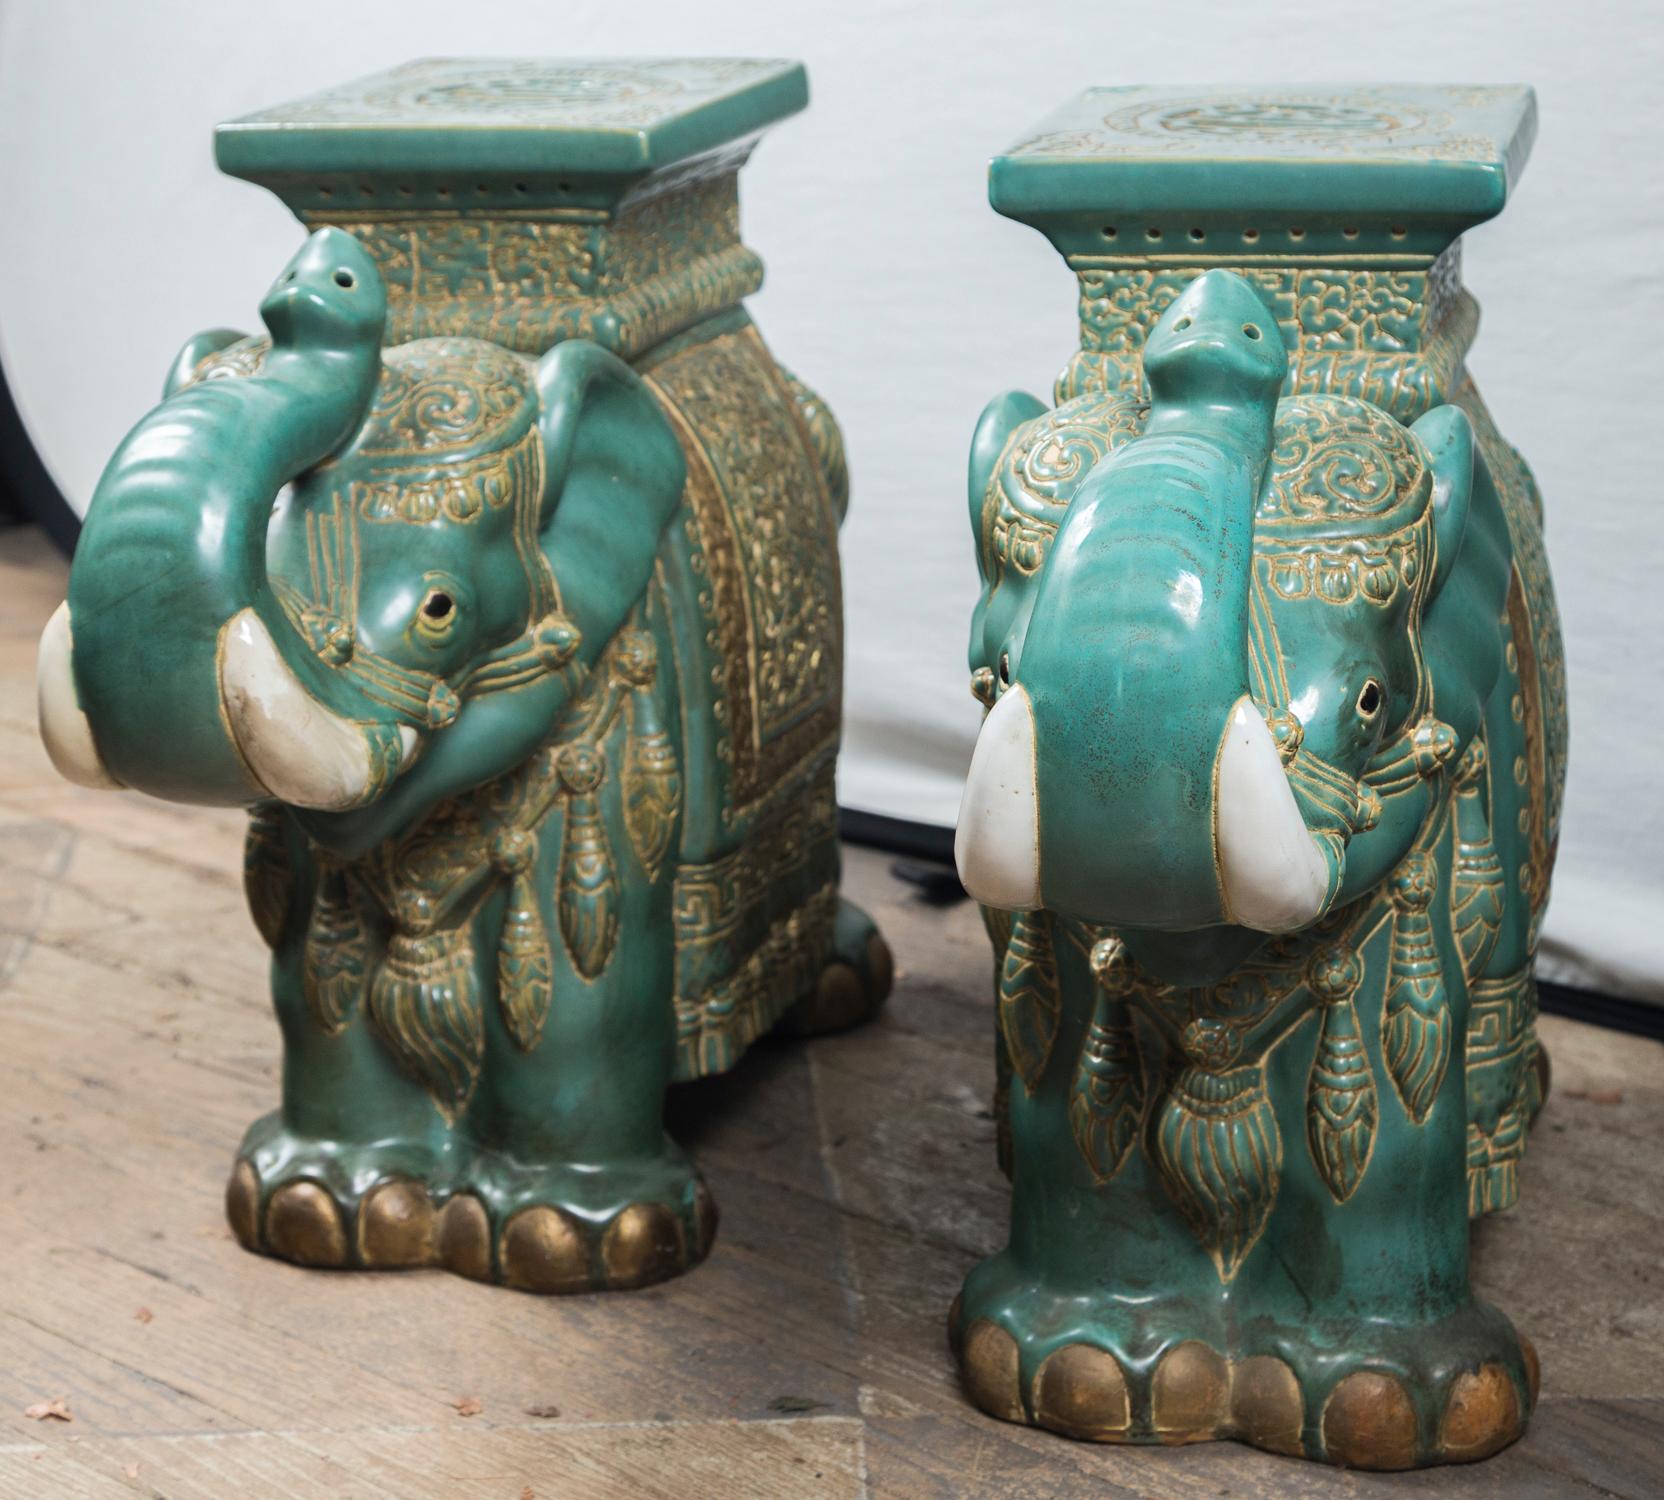 Each with a top flat surface measuring 8.25 x 7.25
Blue green glazed incised with decorative elements. White tusks.
The elephants with their trunks up.
Gold paint to simulate gilded mounts.